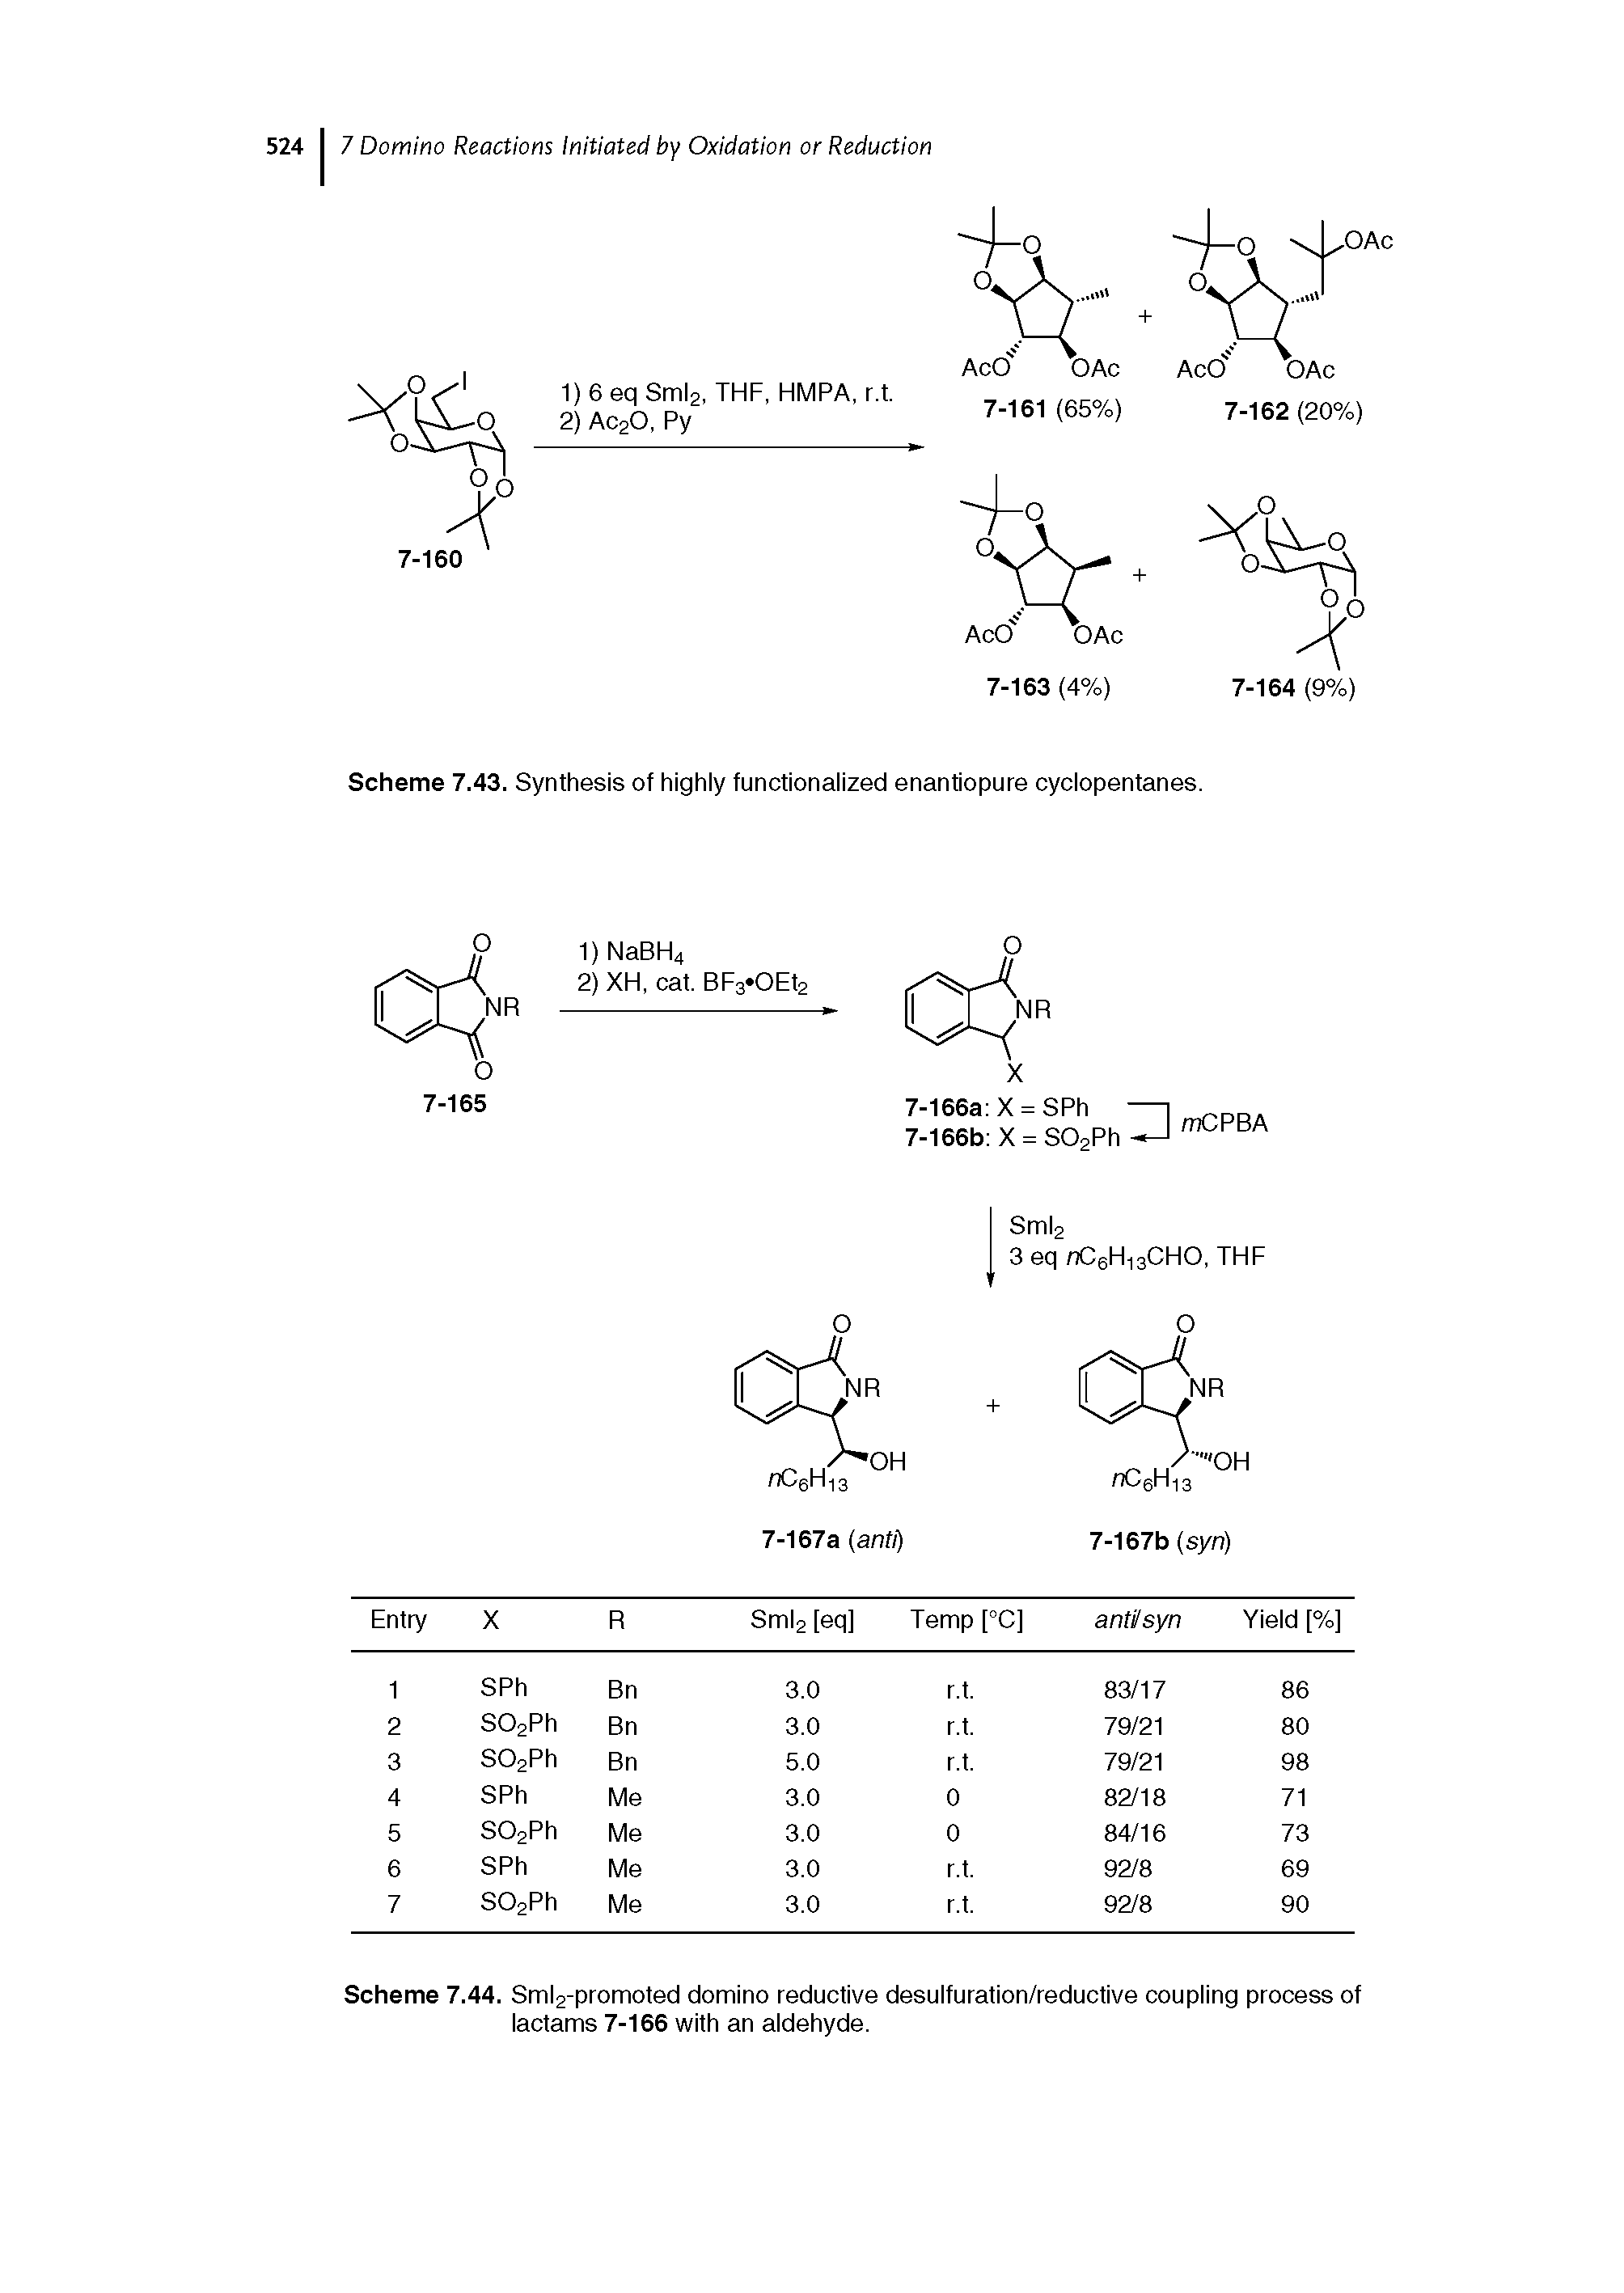 Scheme 7.43. Synthesis of highly functionalized enantiopure cyclopentanes.